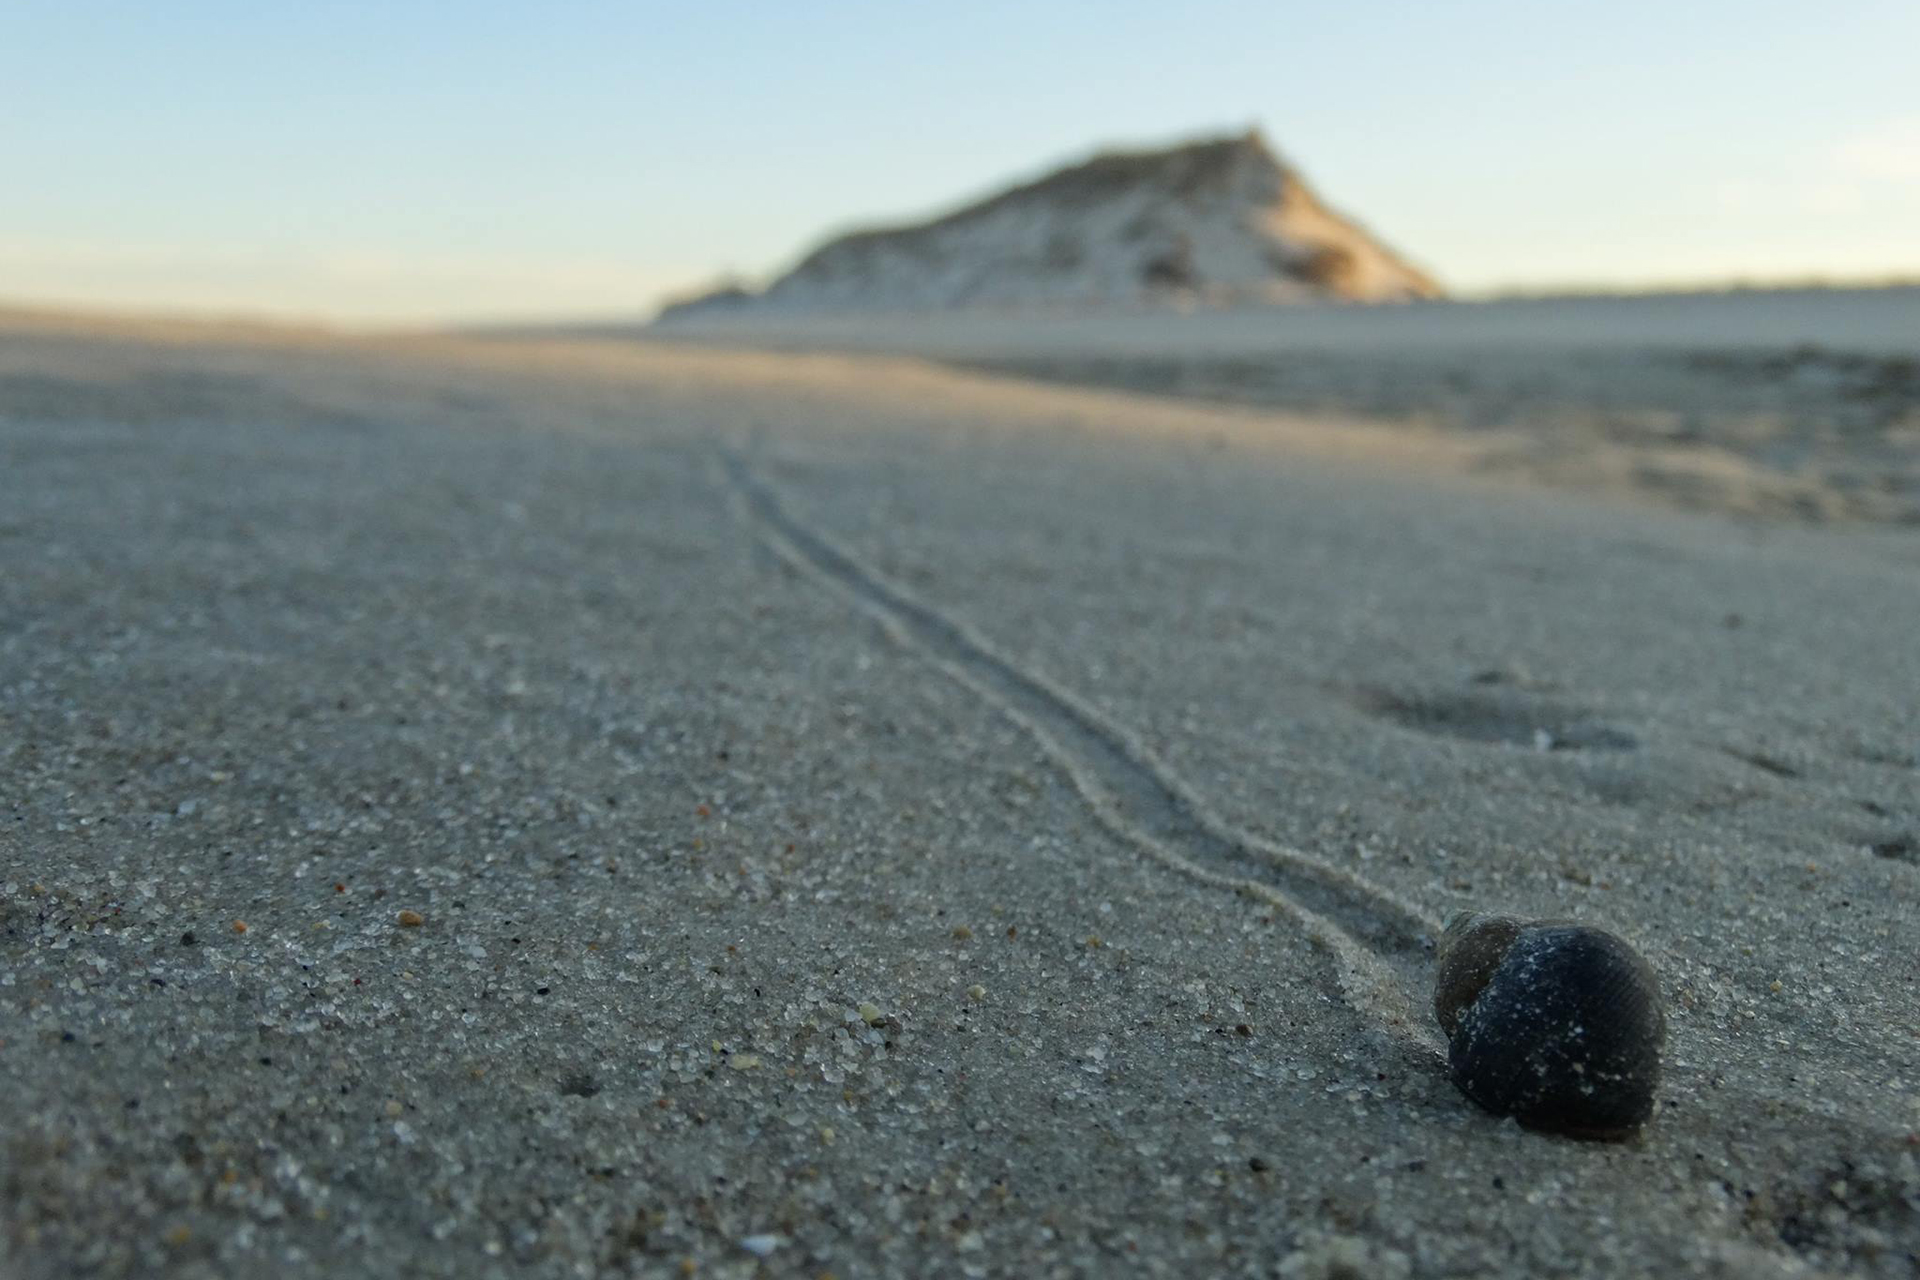 Periwinkle at the end of a trail in the sand by Sean Kortis